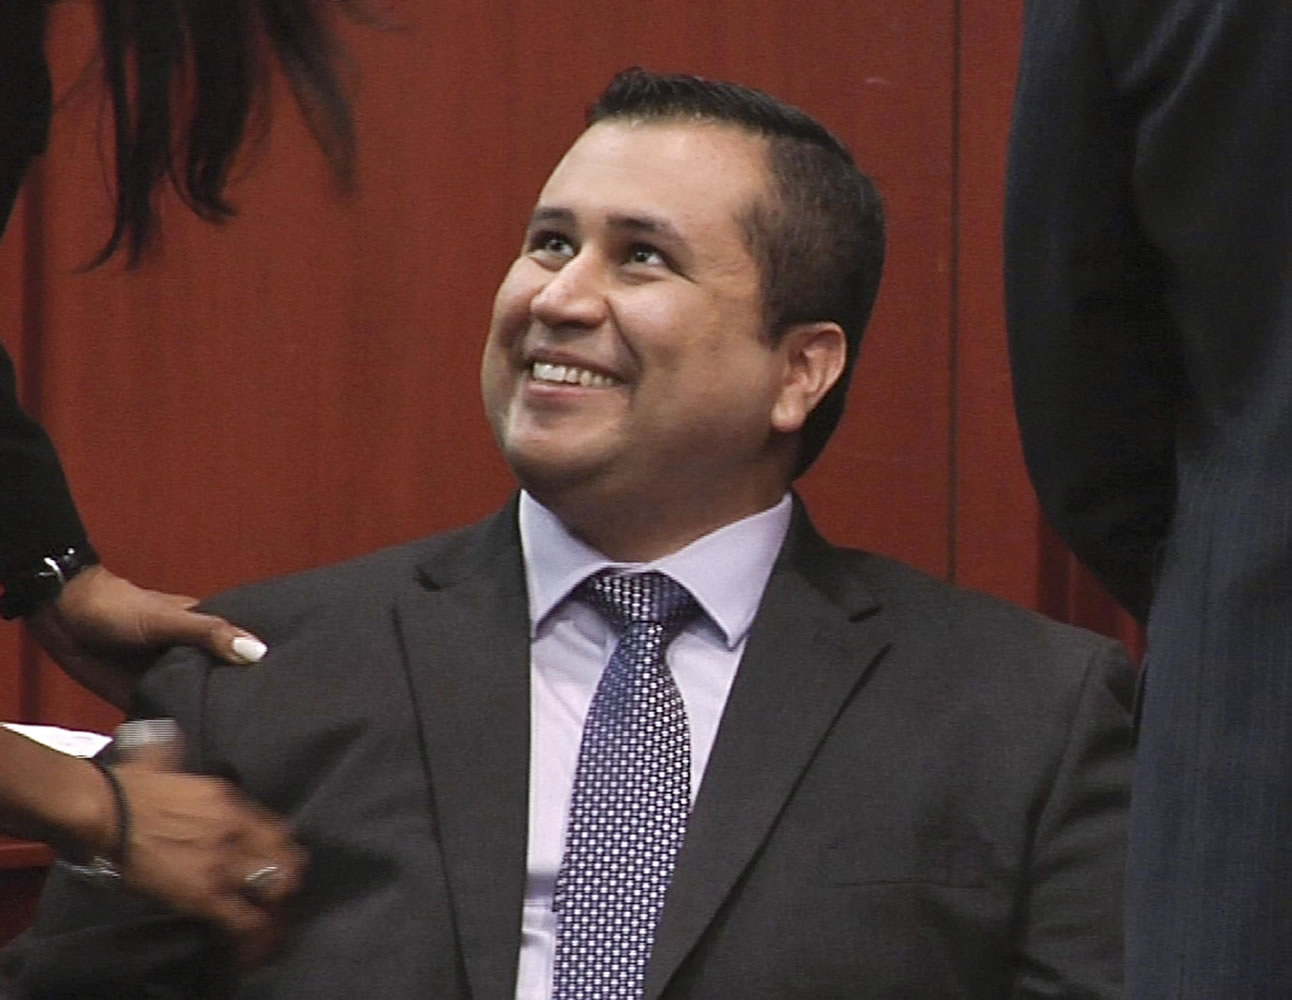 George Zimmerman smiles after a not guilty verdict was handed down in his trial at the Seminole County Courthouse in Sanford, Fla.